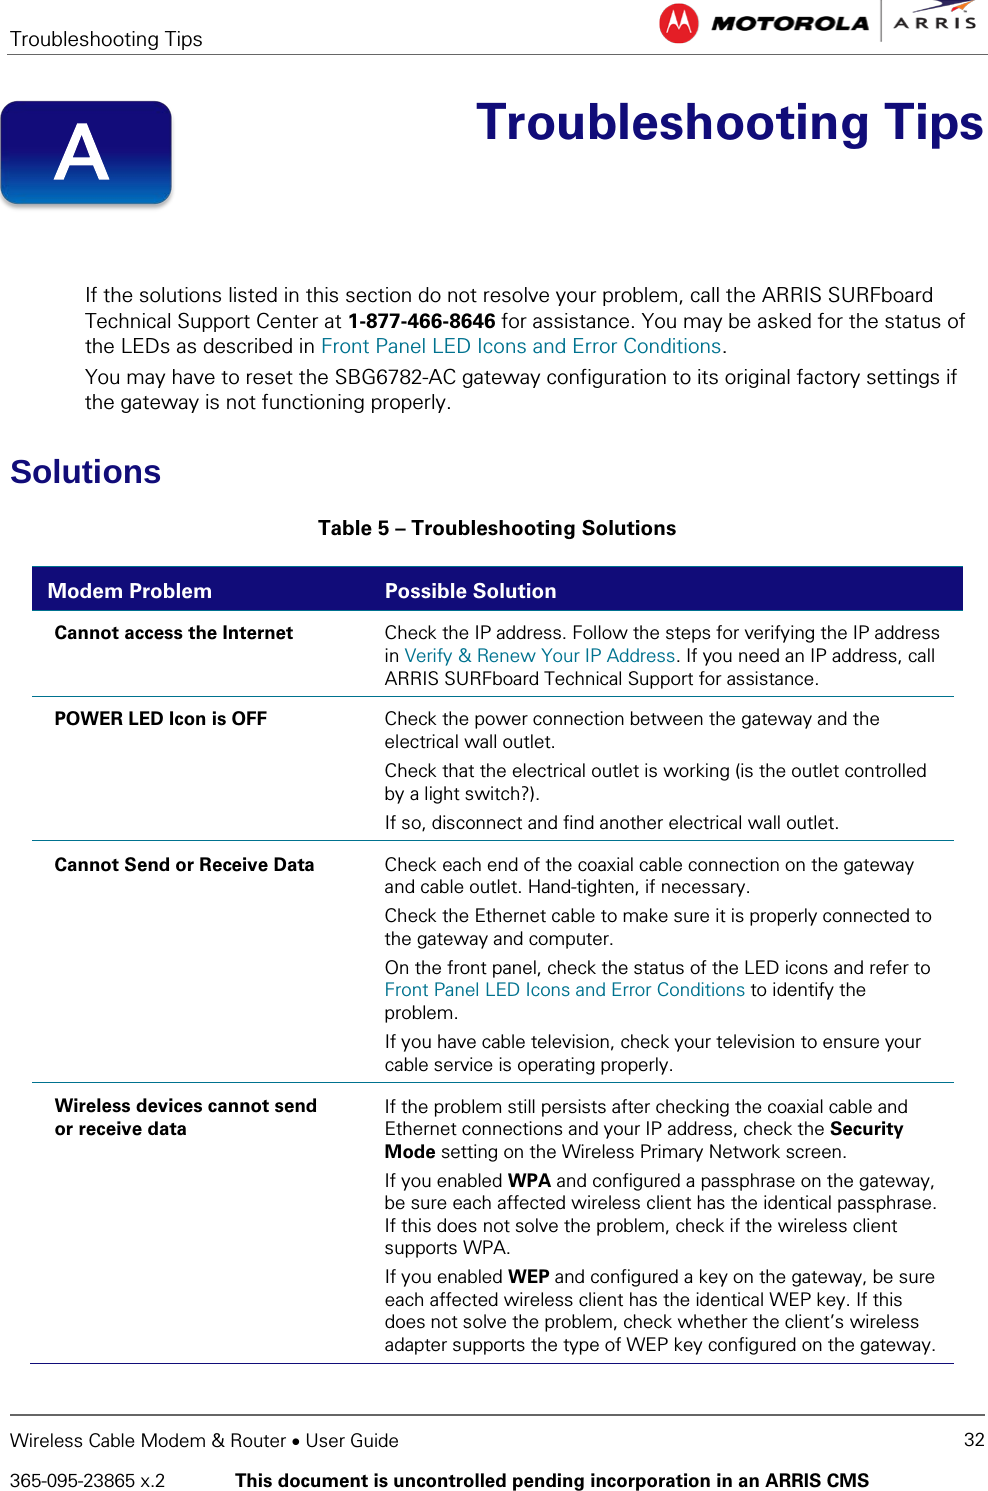 Troubleshooting Tips   Wireless Cable Modem &amp; Router • User Guide 32 365-095-23865 x.2   This document is uncontrolled pending incorporation in an ARRIS CMS   Troubleshooting Tips   If the solutions listed in this section do not resolve your problem, call the ARRIS SURFboard Technical Support Center at 1-877-466-8646 for assistance. You may be asked for the status of the LEDs as described in Front Panel LED Icons and Error Conditions. You may have to reset the SBG6782-AC gateway configuration to its original factory settings if the gateway is not functioning properly. Solutions Table 5 – Troubleshooting Solutions Modem Problem Possible Solution Cannot access the Internet Check the IP address. Follow the steps for verifying the IP address in Verify &amp; Renew Your IP Address. If you need an IP address, call ARRIS SURFboard Technical Support for assistance. POWER LED Icon is OFF Check the power connection between the gateway and the electrical wall outlet. Check that the electrical outlet is working (is the outlet controlled by a light switch?). If so, disconnect and find another electrical wall outlet. Cannot Send or Receive Data Check each end of the coaxial cable connection on the gateway and cable outlet. Hand-tighten, if necessary. Check the Ethernet cable to make sure it is properly connected to the gateway and computer. On the front panel, check the status of the LED icons and refer to Front Panel LED Icons and Error Conditions to identify the problem. If you have cable television, check your television to ensure your cable service is operating properly. Wireless devices cannot send or receive data If the problem still persists after checking the coaxial cable and Ethernet connections and your IP address, check the Security Mode setting on the Wireless Primary Network screen. If you enabled WPA and configured a passphrase on the gateway, be sure each affected wireless client has the identical passphrase. If this does not solve the problem, check if the wireless client supports WPA. If you enabled WEP and configured a key on the gateway, be sure each affected wireless client has the identical WEP key. If this does not solve the problem, check whether the client’s wireless adapter supports the type of WEP key configured on the gateway. A 